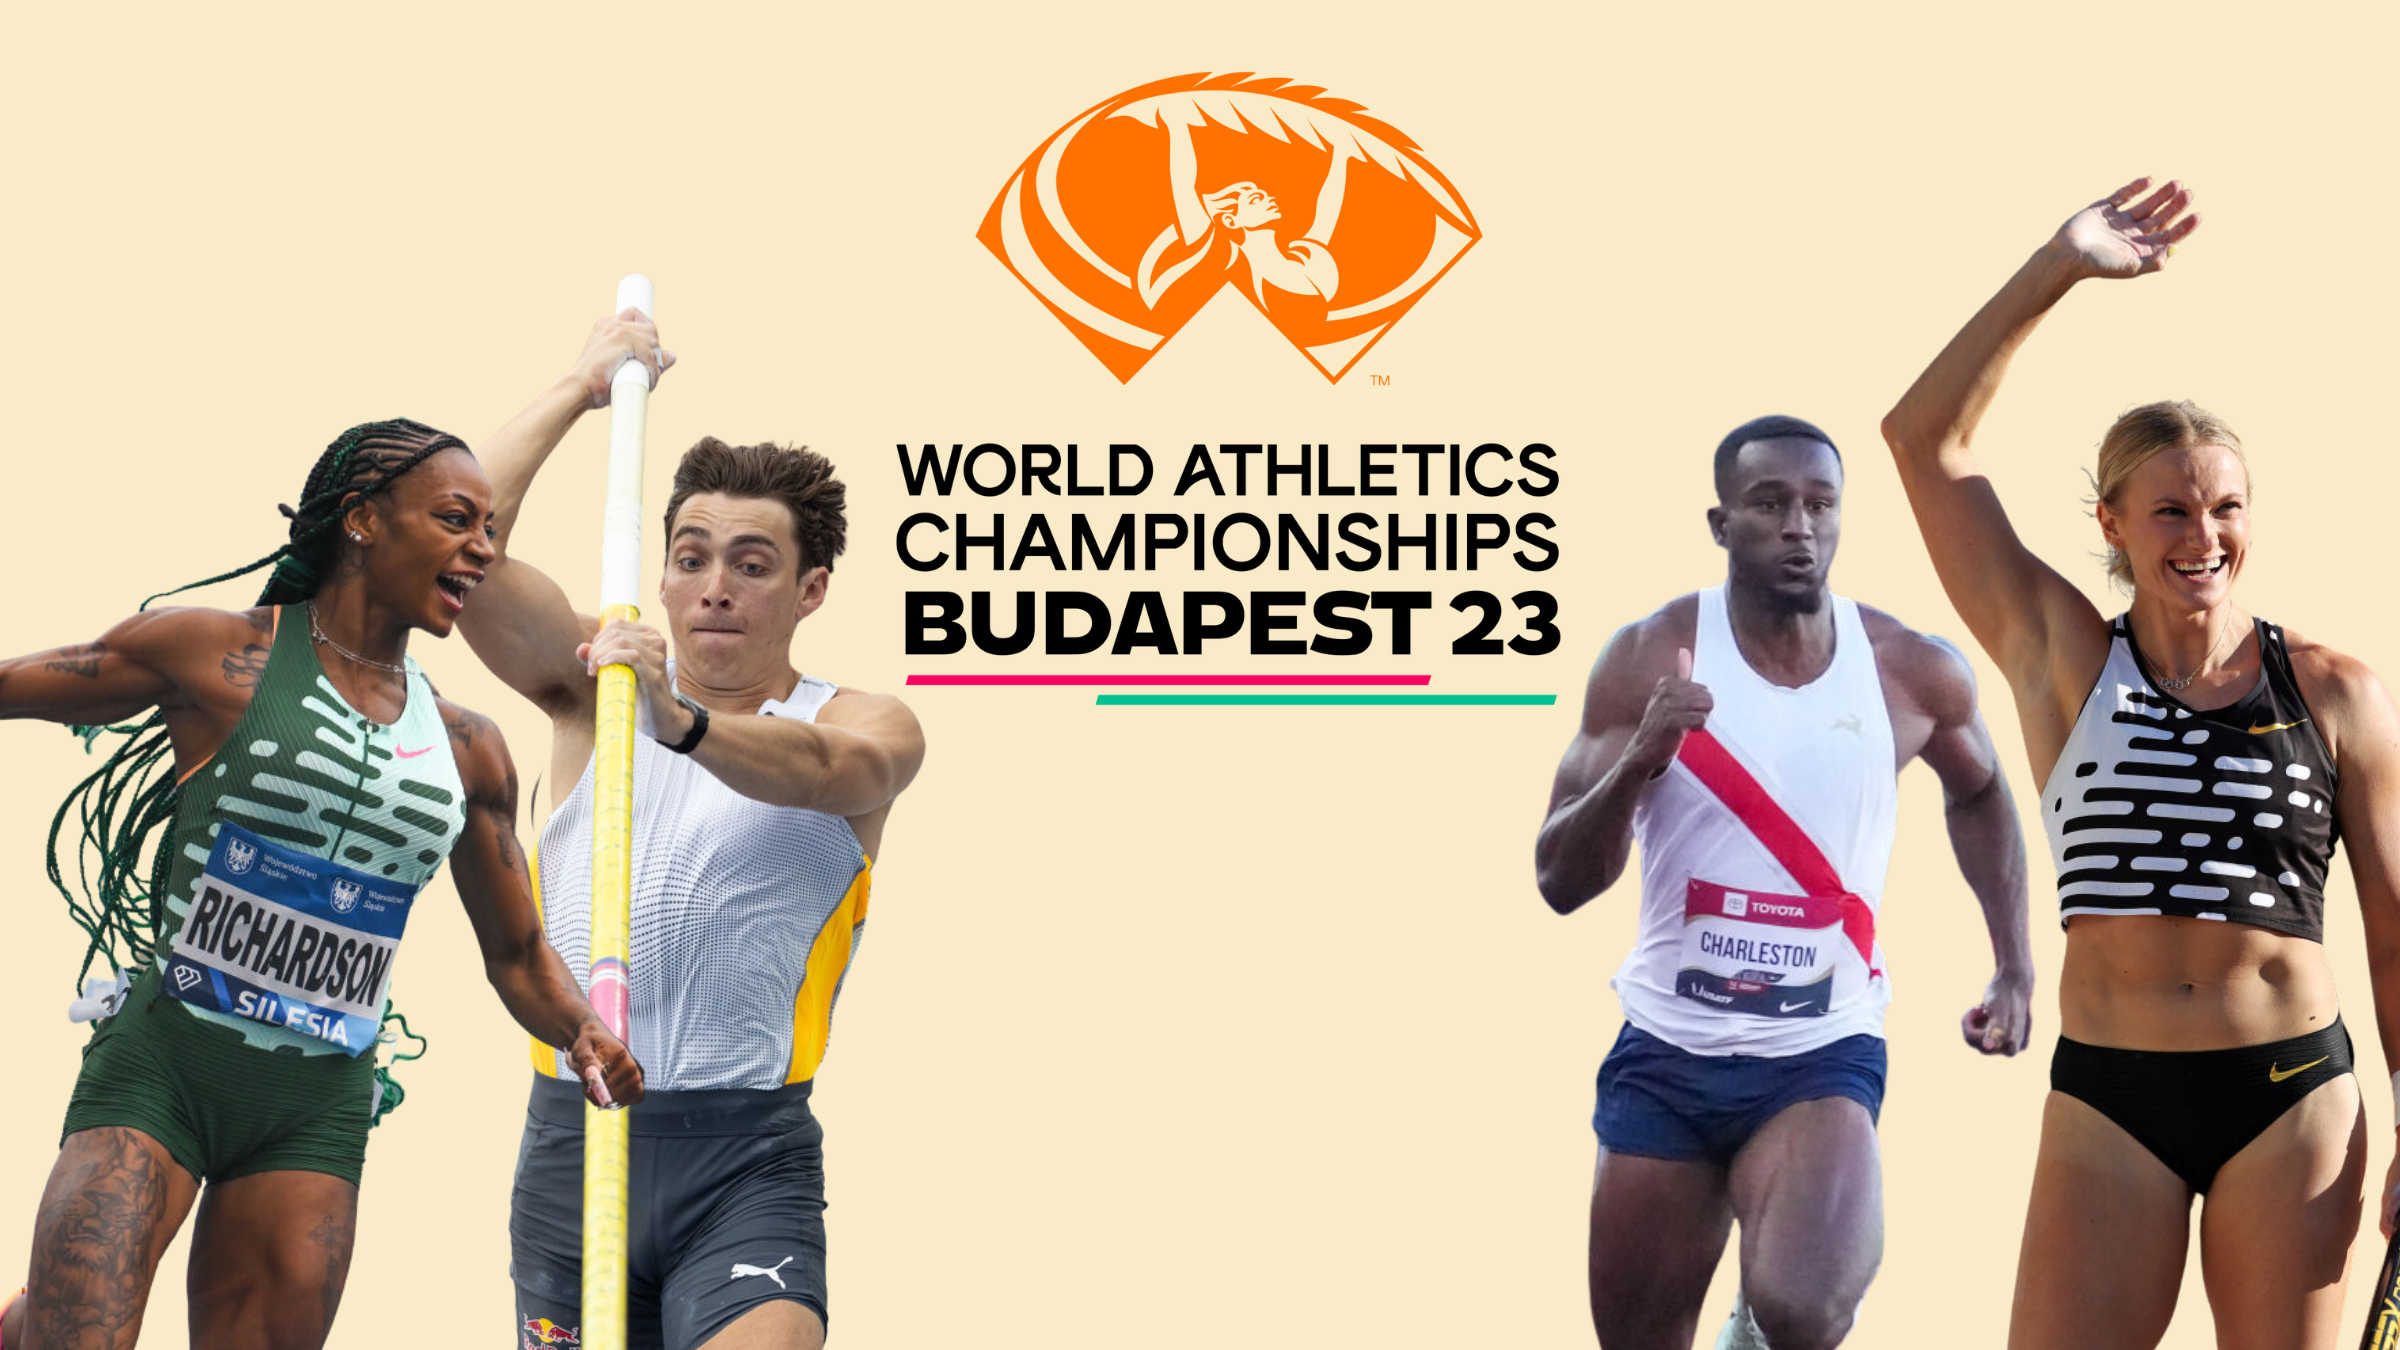 ASICS & World Athletics Announce New Conference: The Business of